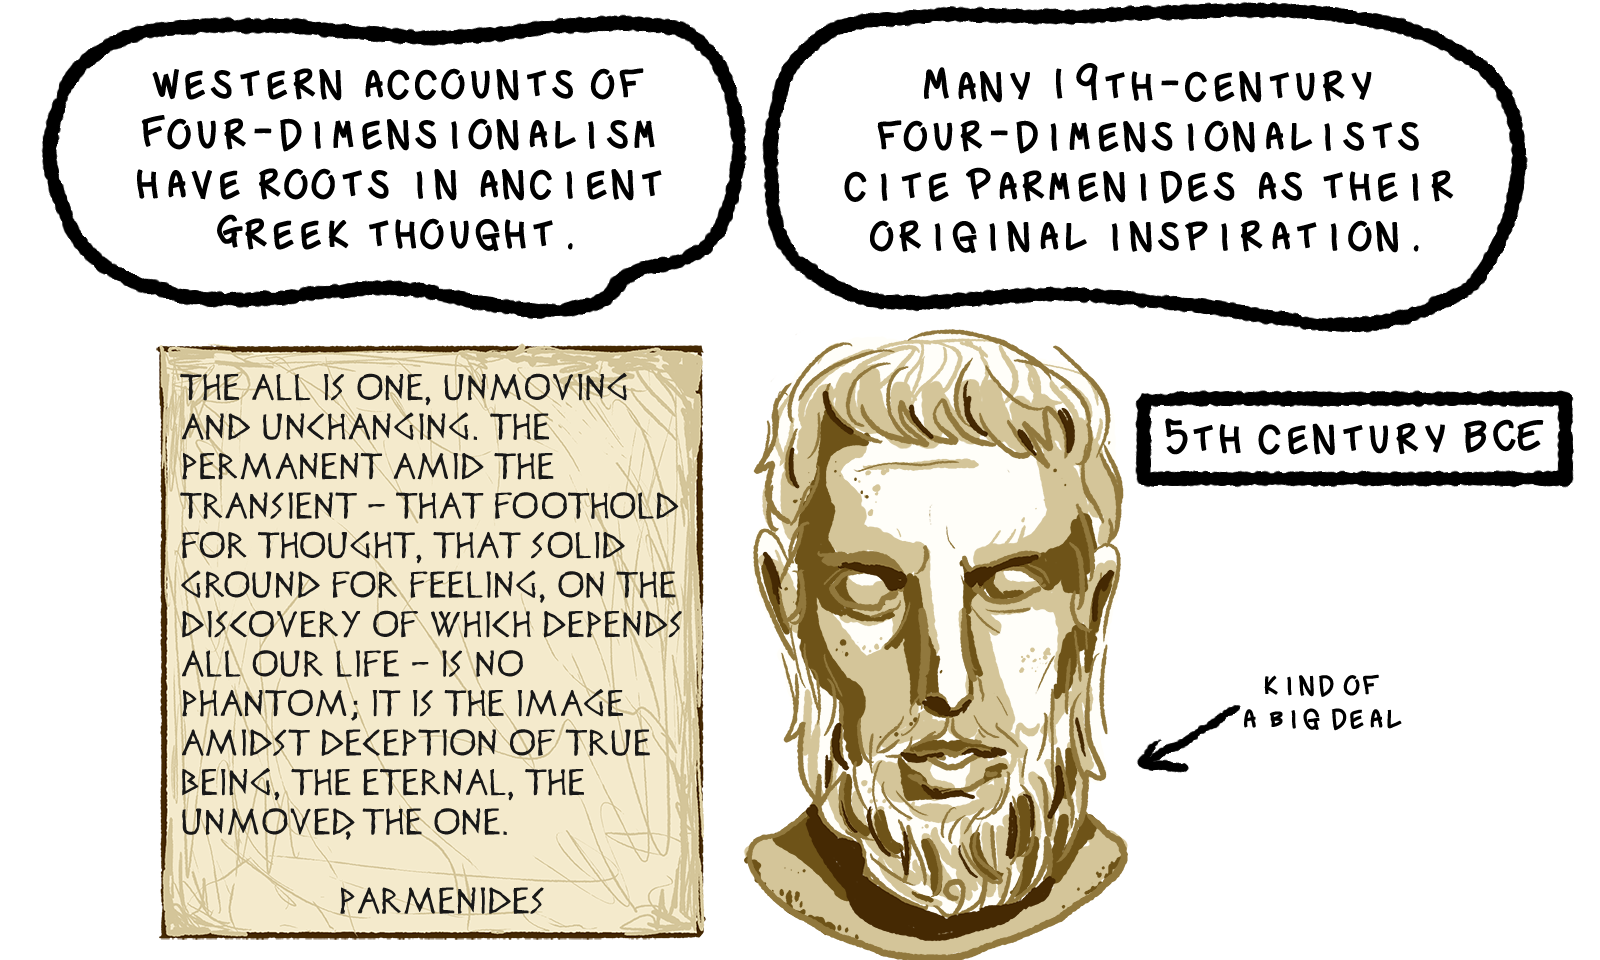 A text box reads, Western accounts of four-dimensionalism have roots in ancient greek thought. Many 19th-century four-dimensionalists cite Parmenides as their original inspiration. Pictured is a drawing of a bust of Parmenides, with the caption 5th century BCE. An arrow points at him, reading in small text, kind of a big deal. To his left we see a stone tablet that is inscribed with Greek-looking lettering. This reads, The all is one, unmoving and unchanging. The permanent amid the transient - that foothold for thought, that solid ground for feeling, on the discovery of which depends all our life - is no phantom; it is the image amidst deception of true being, the eternal, the unmoved, the one. The quote is attributed to Parmenides.